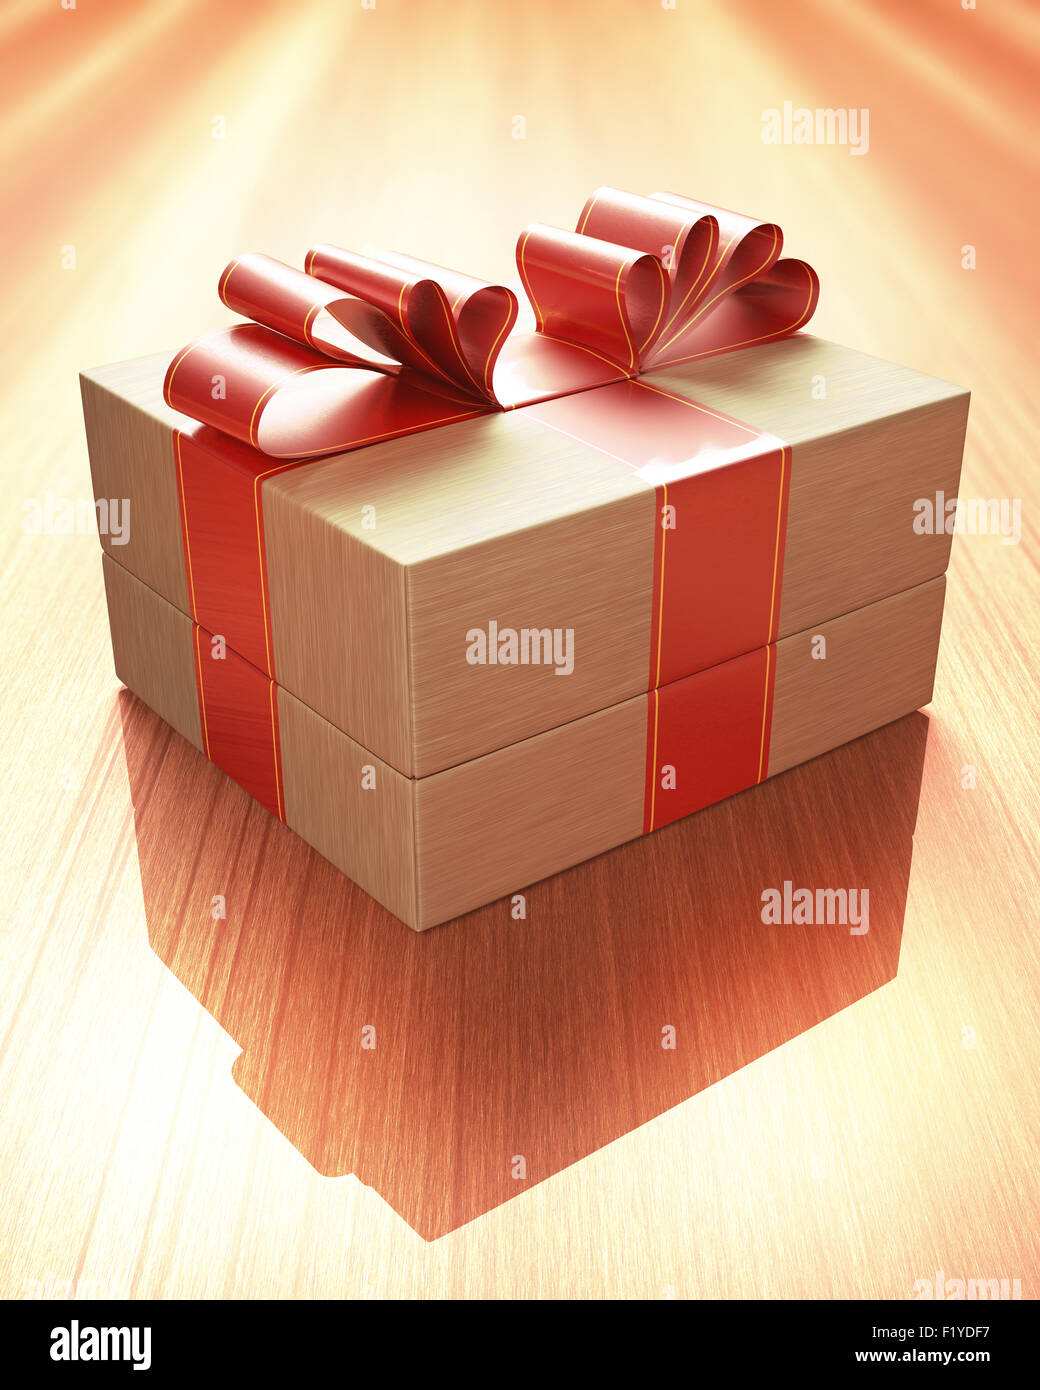 Gift with red ribbon tied up, on a wooden table. Clipping path included. Stock Photo